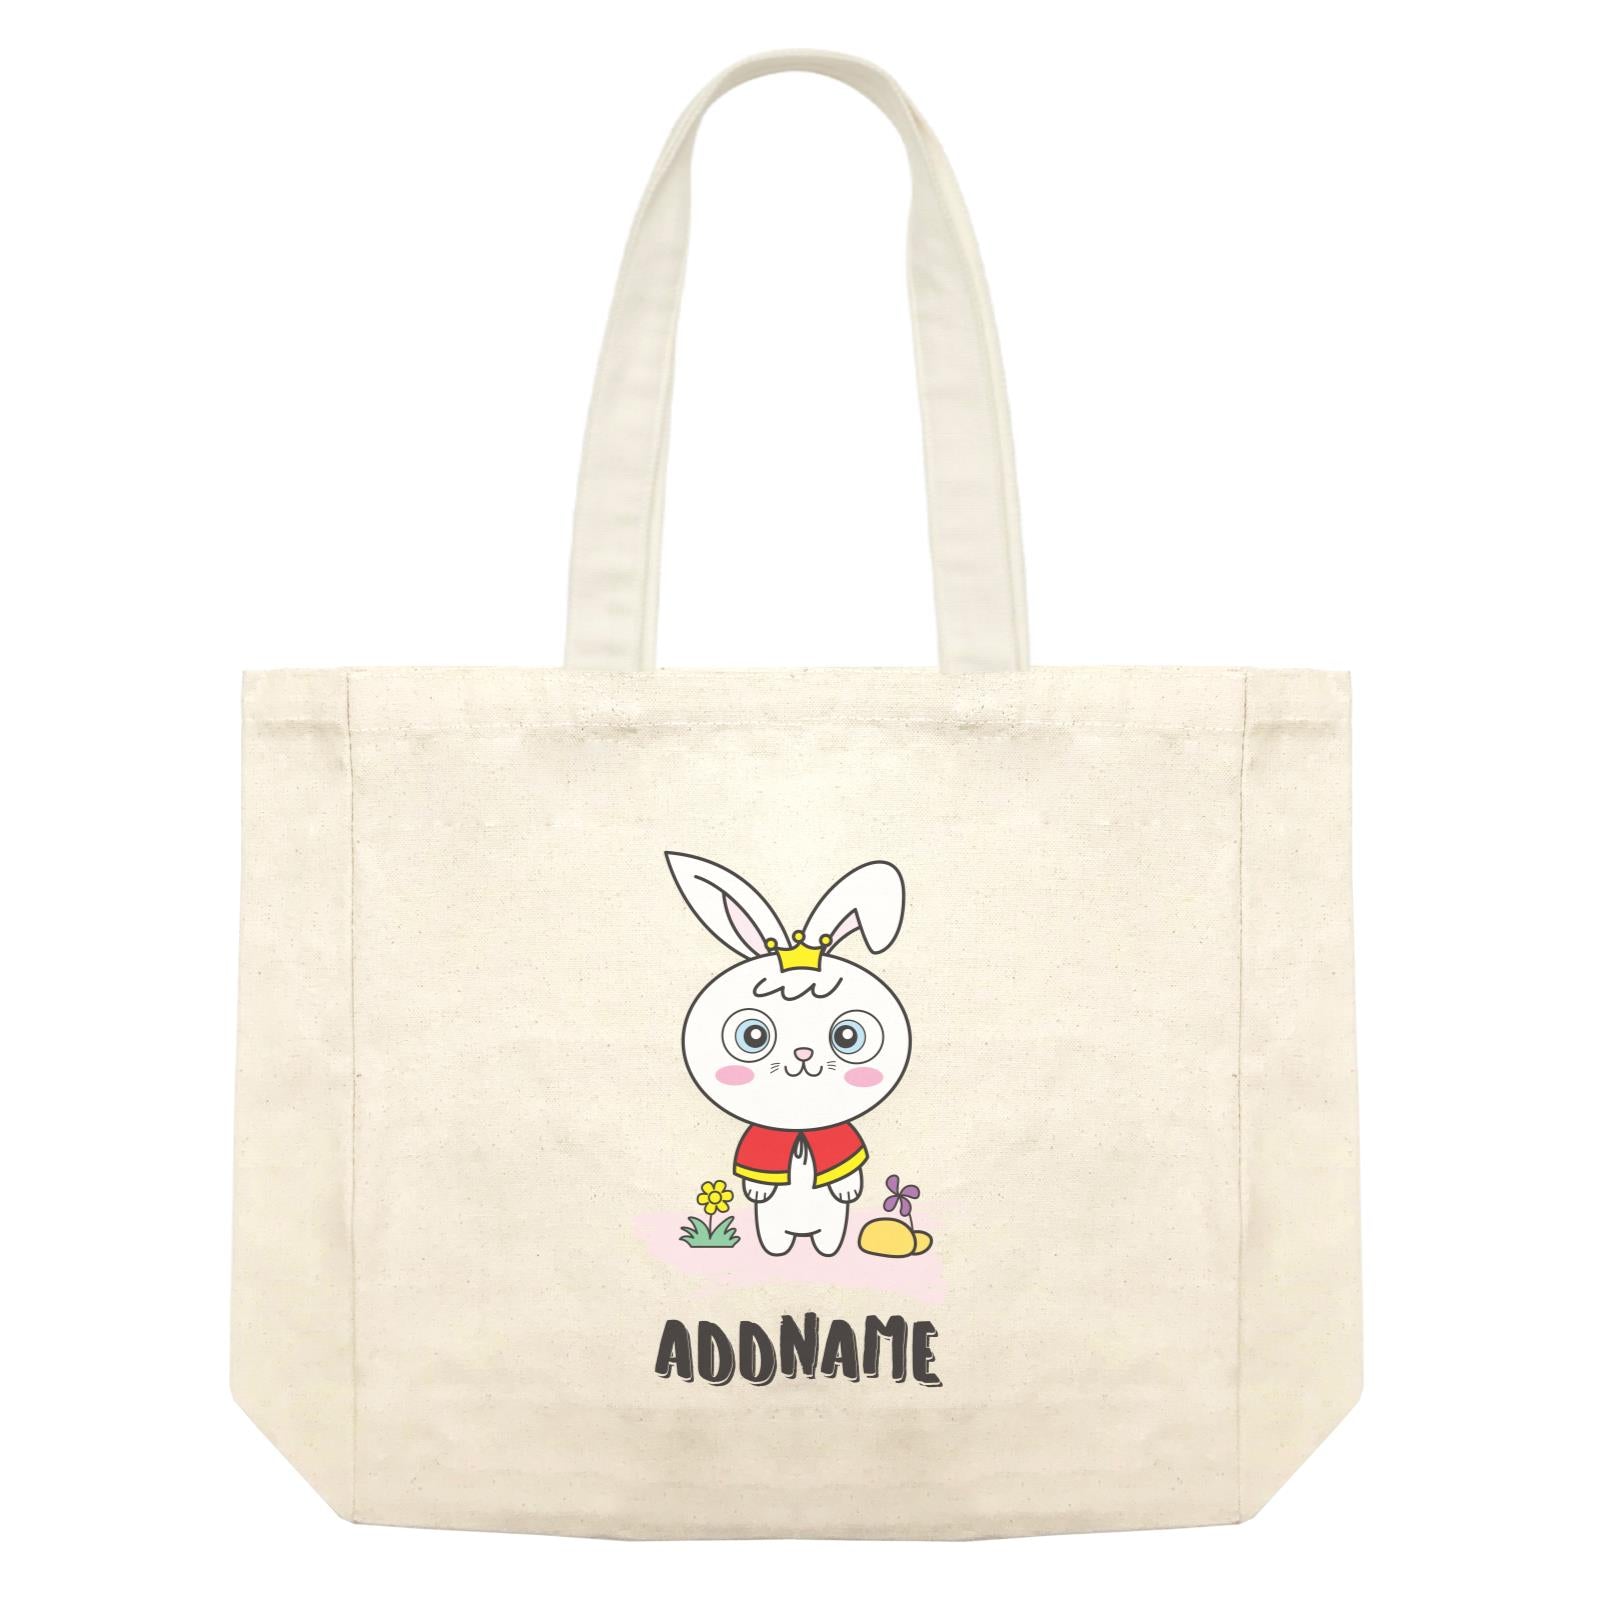 Cool Cute Animals Rabbit Rabbit With Crown Addname Shopping Bag